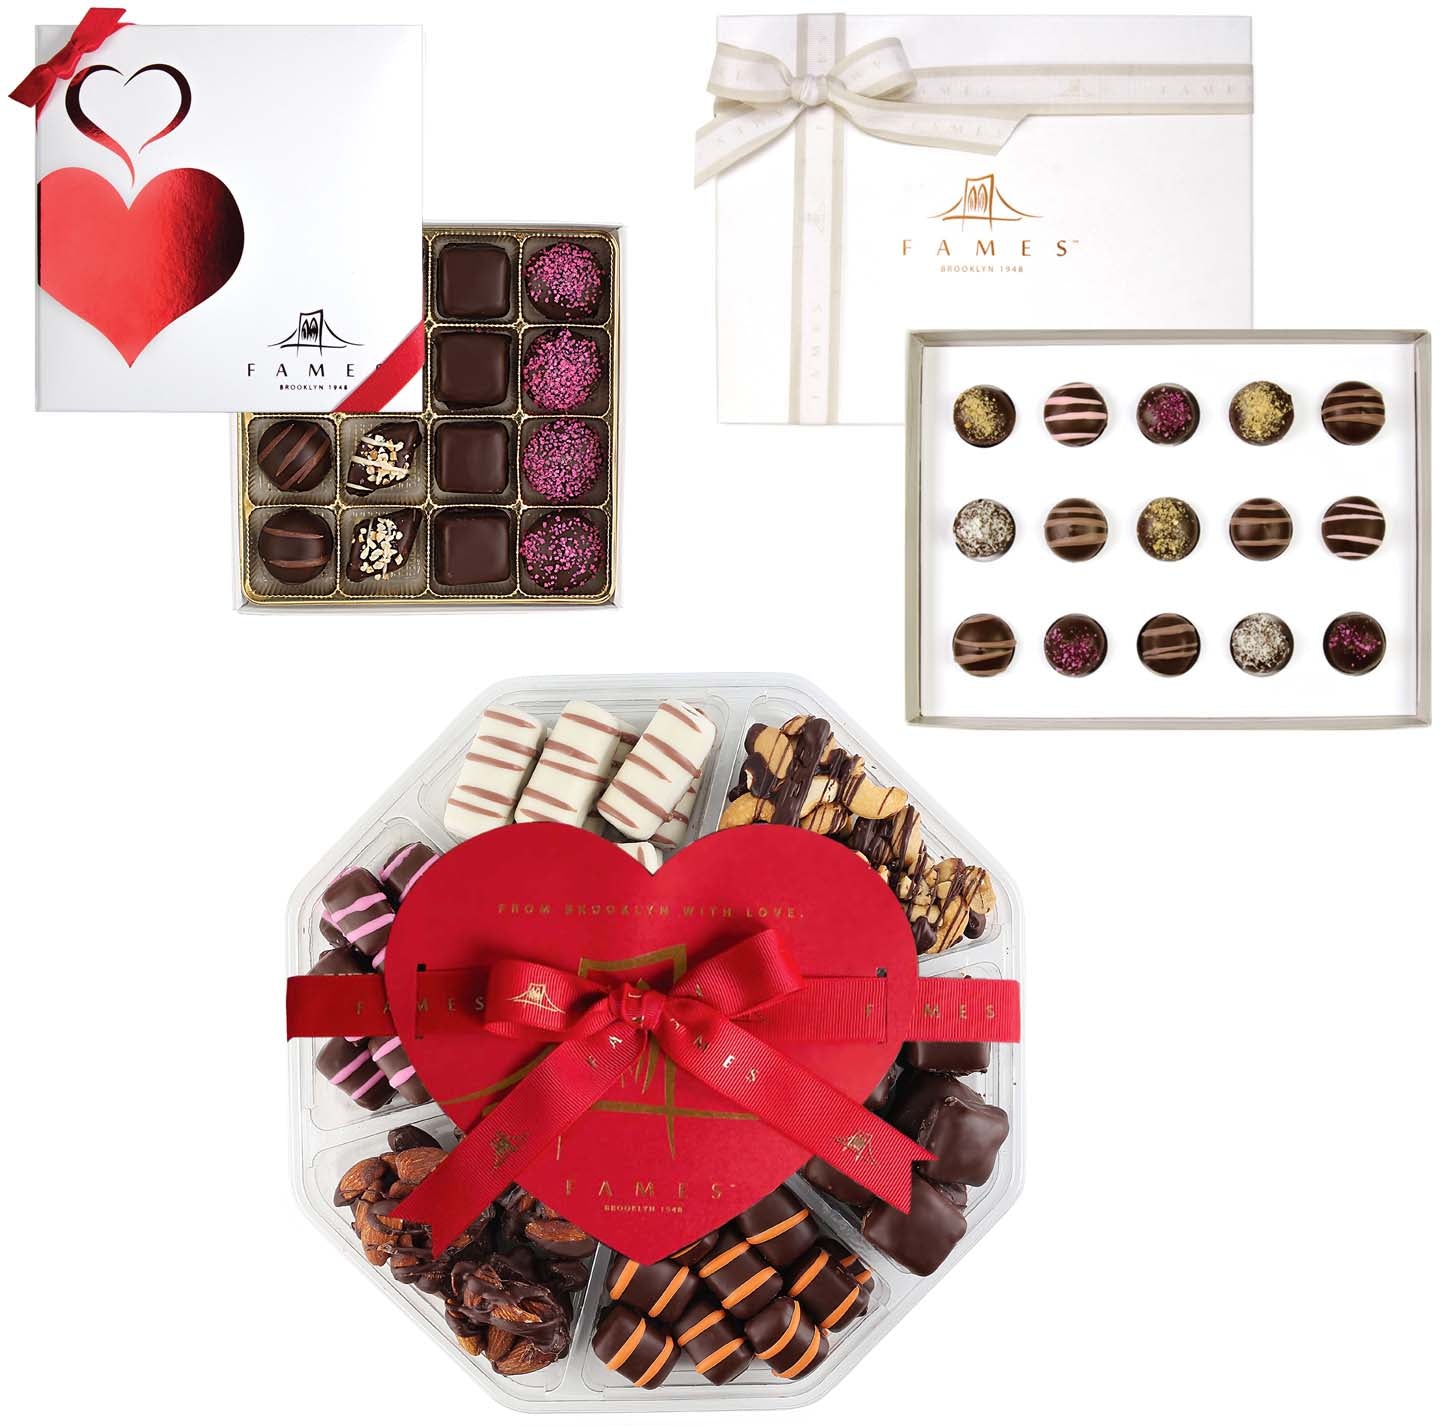 Chocolate Gift Basket Chocolate Gifts - Delicious Gourmet Chocolates (3 Pack), Dairy Free, Kosher.  Fames Chocolate   